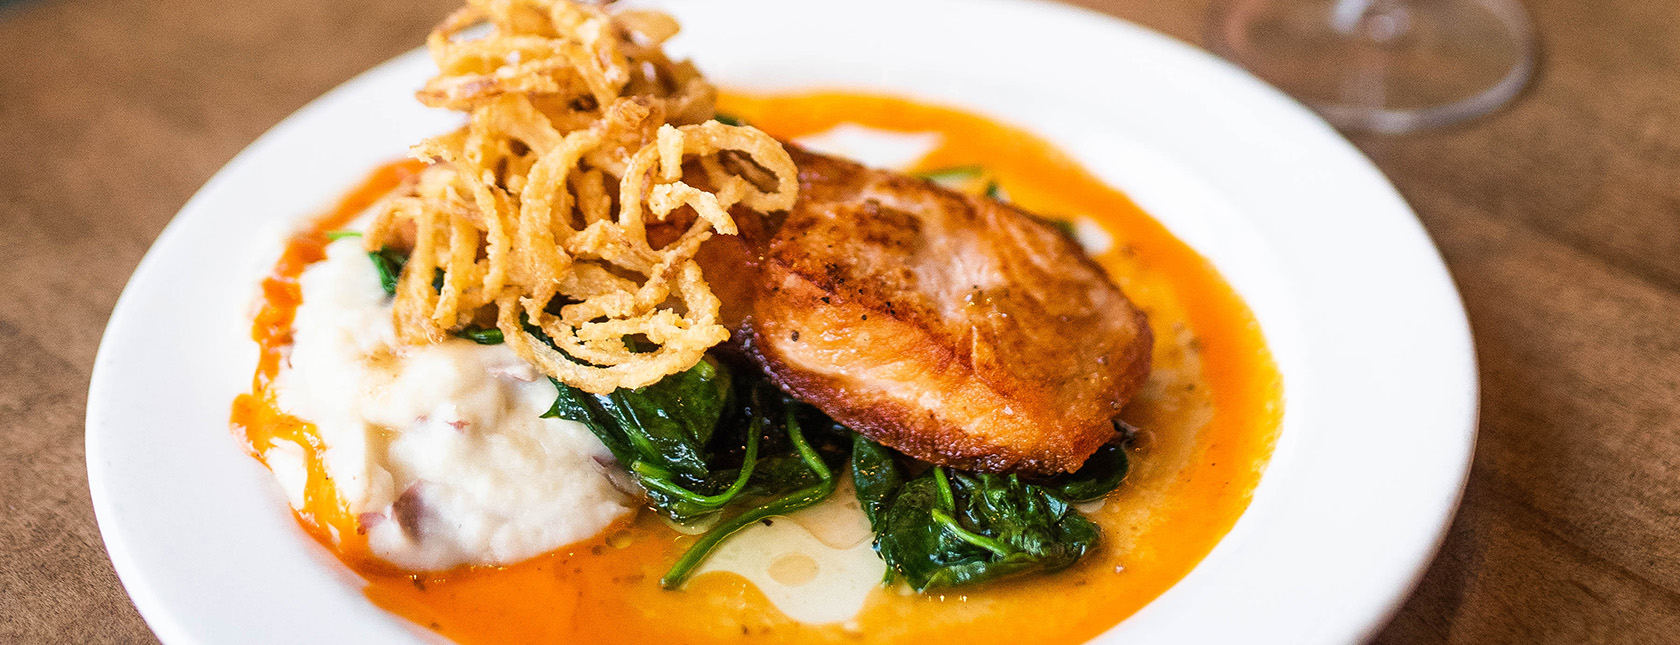 Seared Verlasso Salmon - plated with mashed potatoes, crispy onions and sautéed spinach.